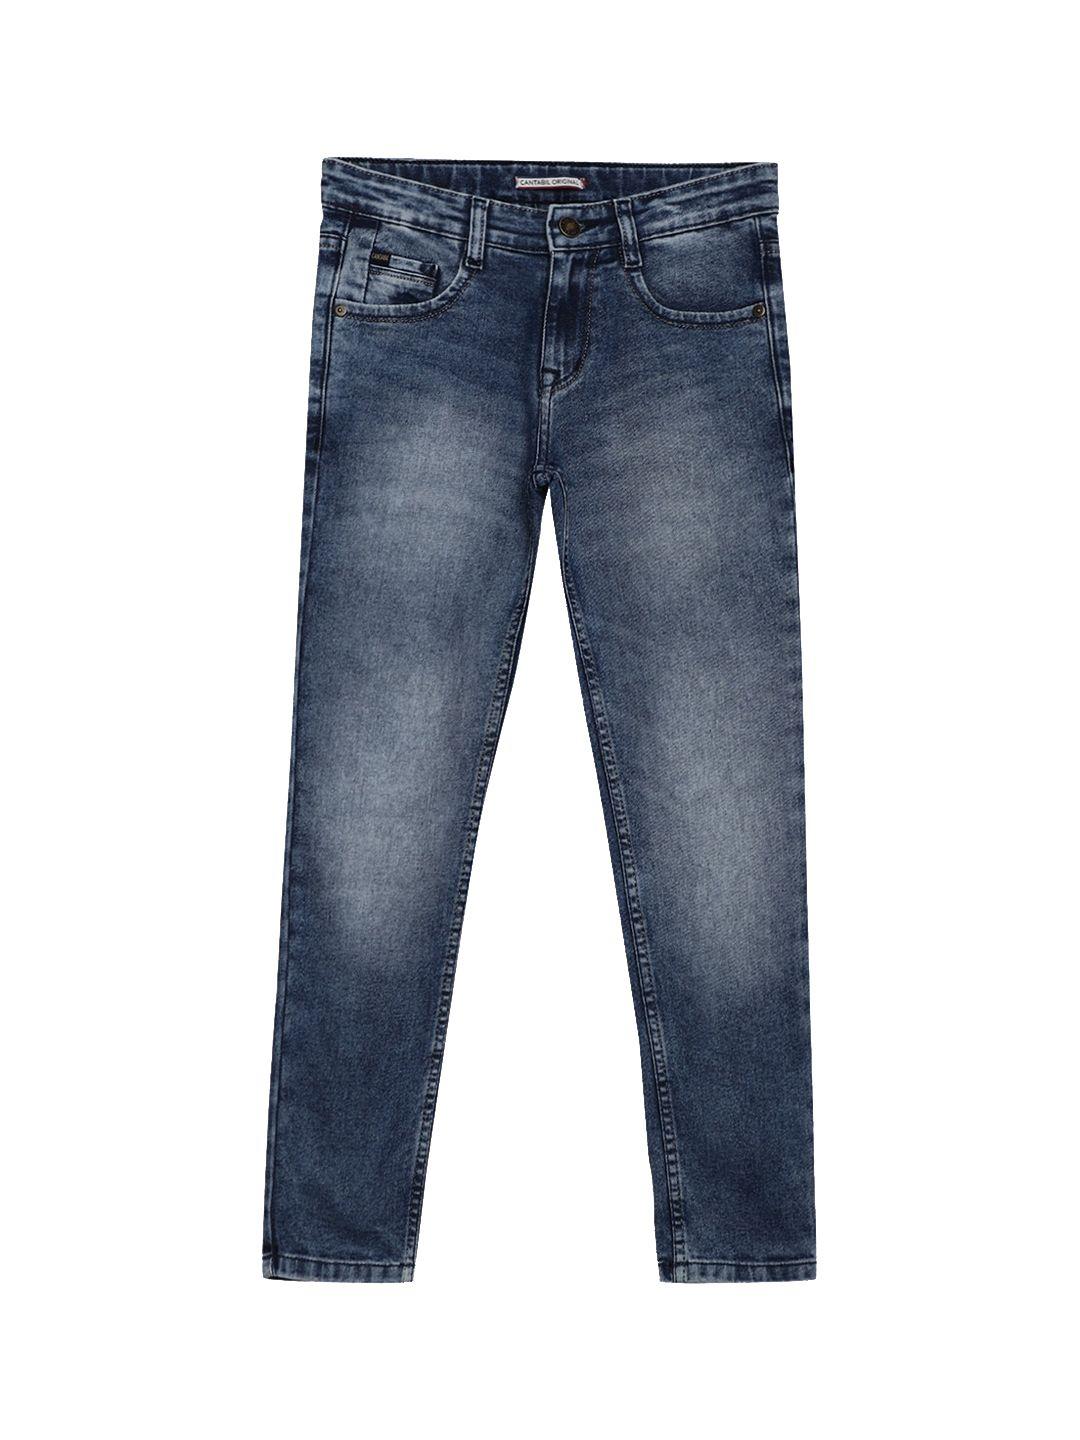 cantabil-boys-blue-comfort-light-fade-stretchable-jeans